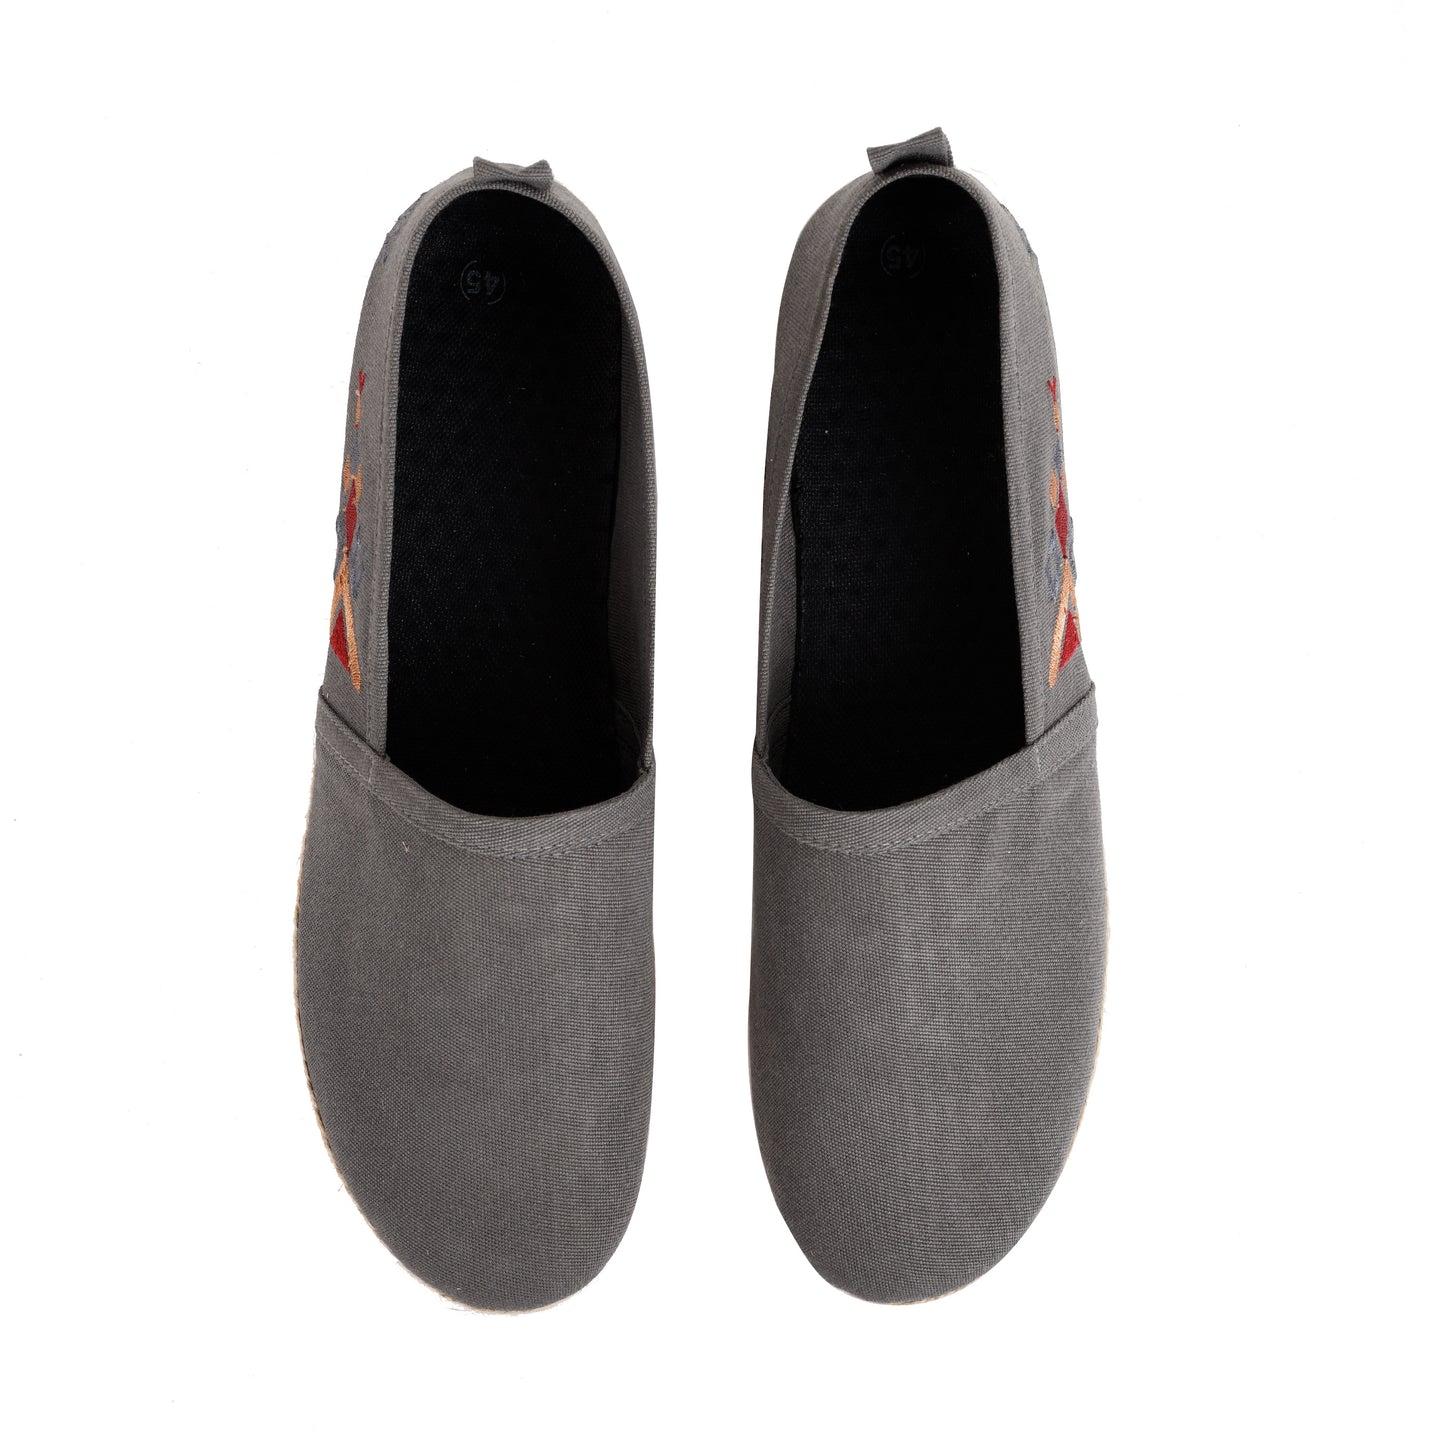 Grey men with colorful embroideries Espadrilles-7000